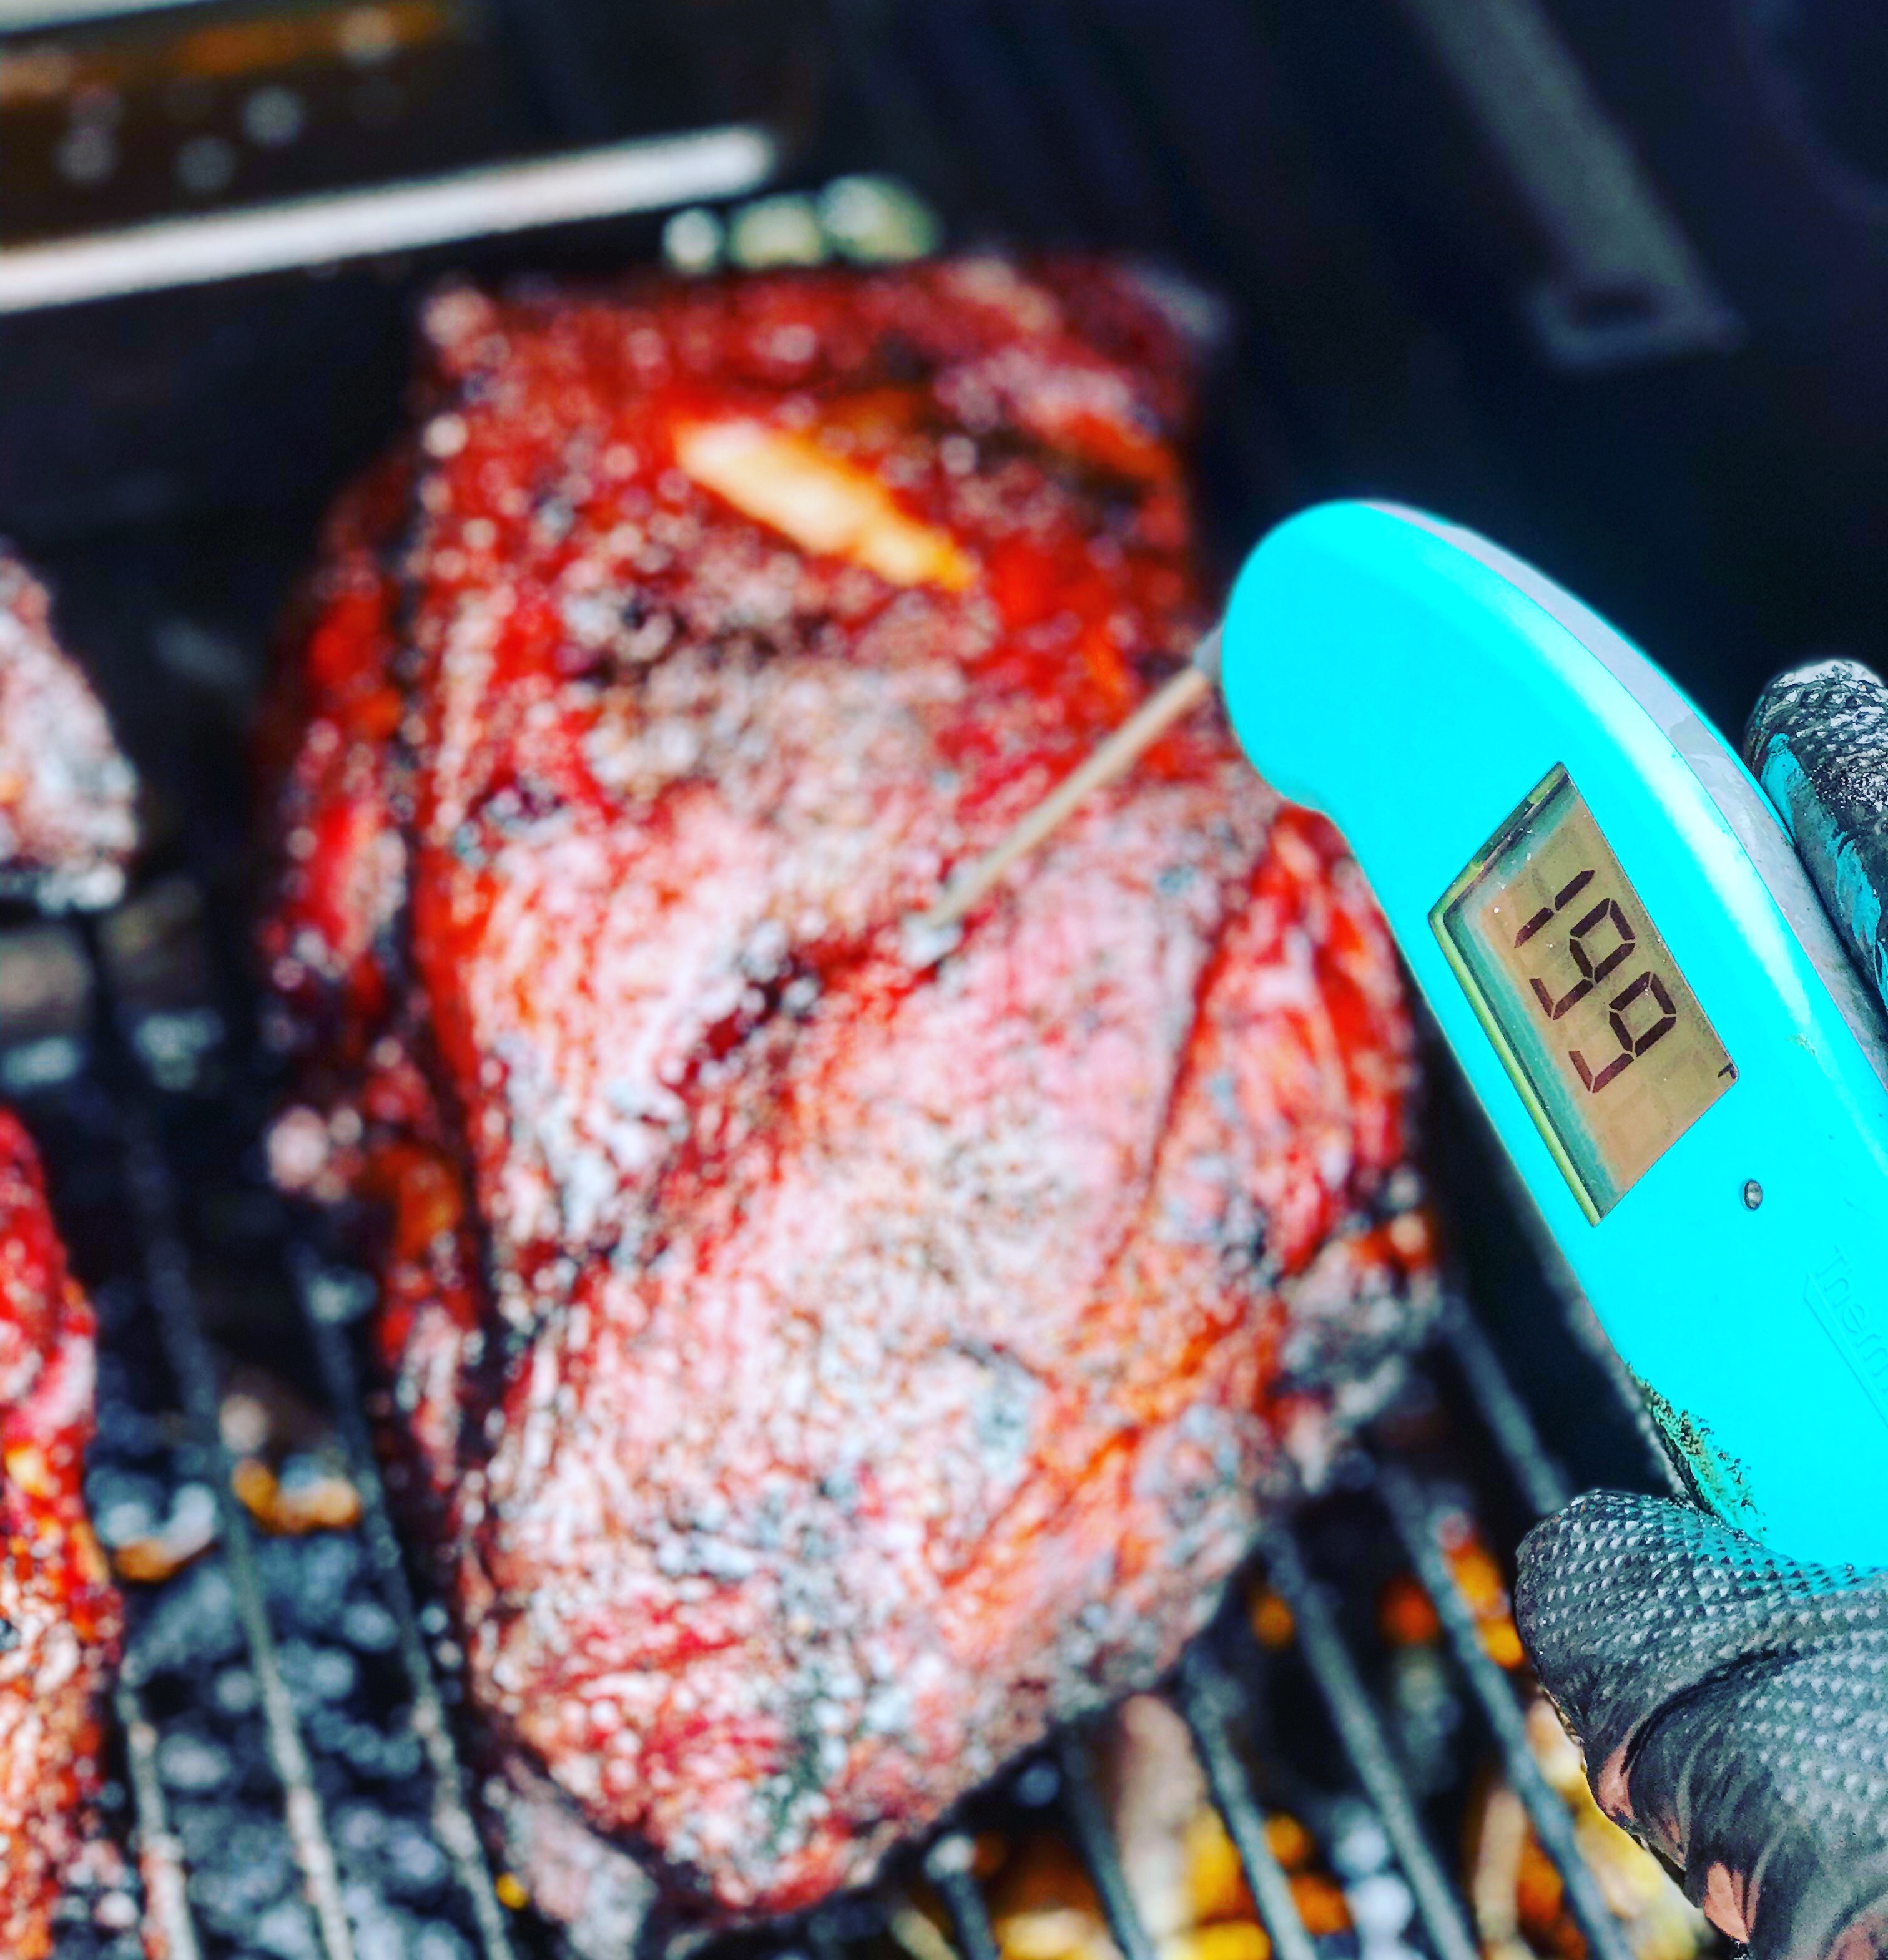 Monitoring temps of the smoked pulled pork with a digital thermometer.